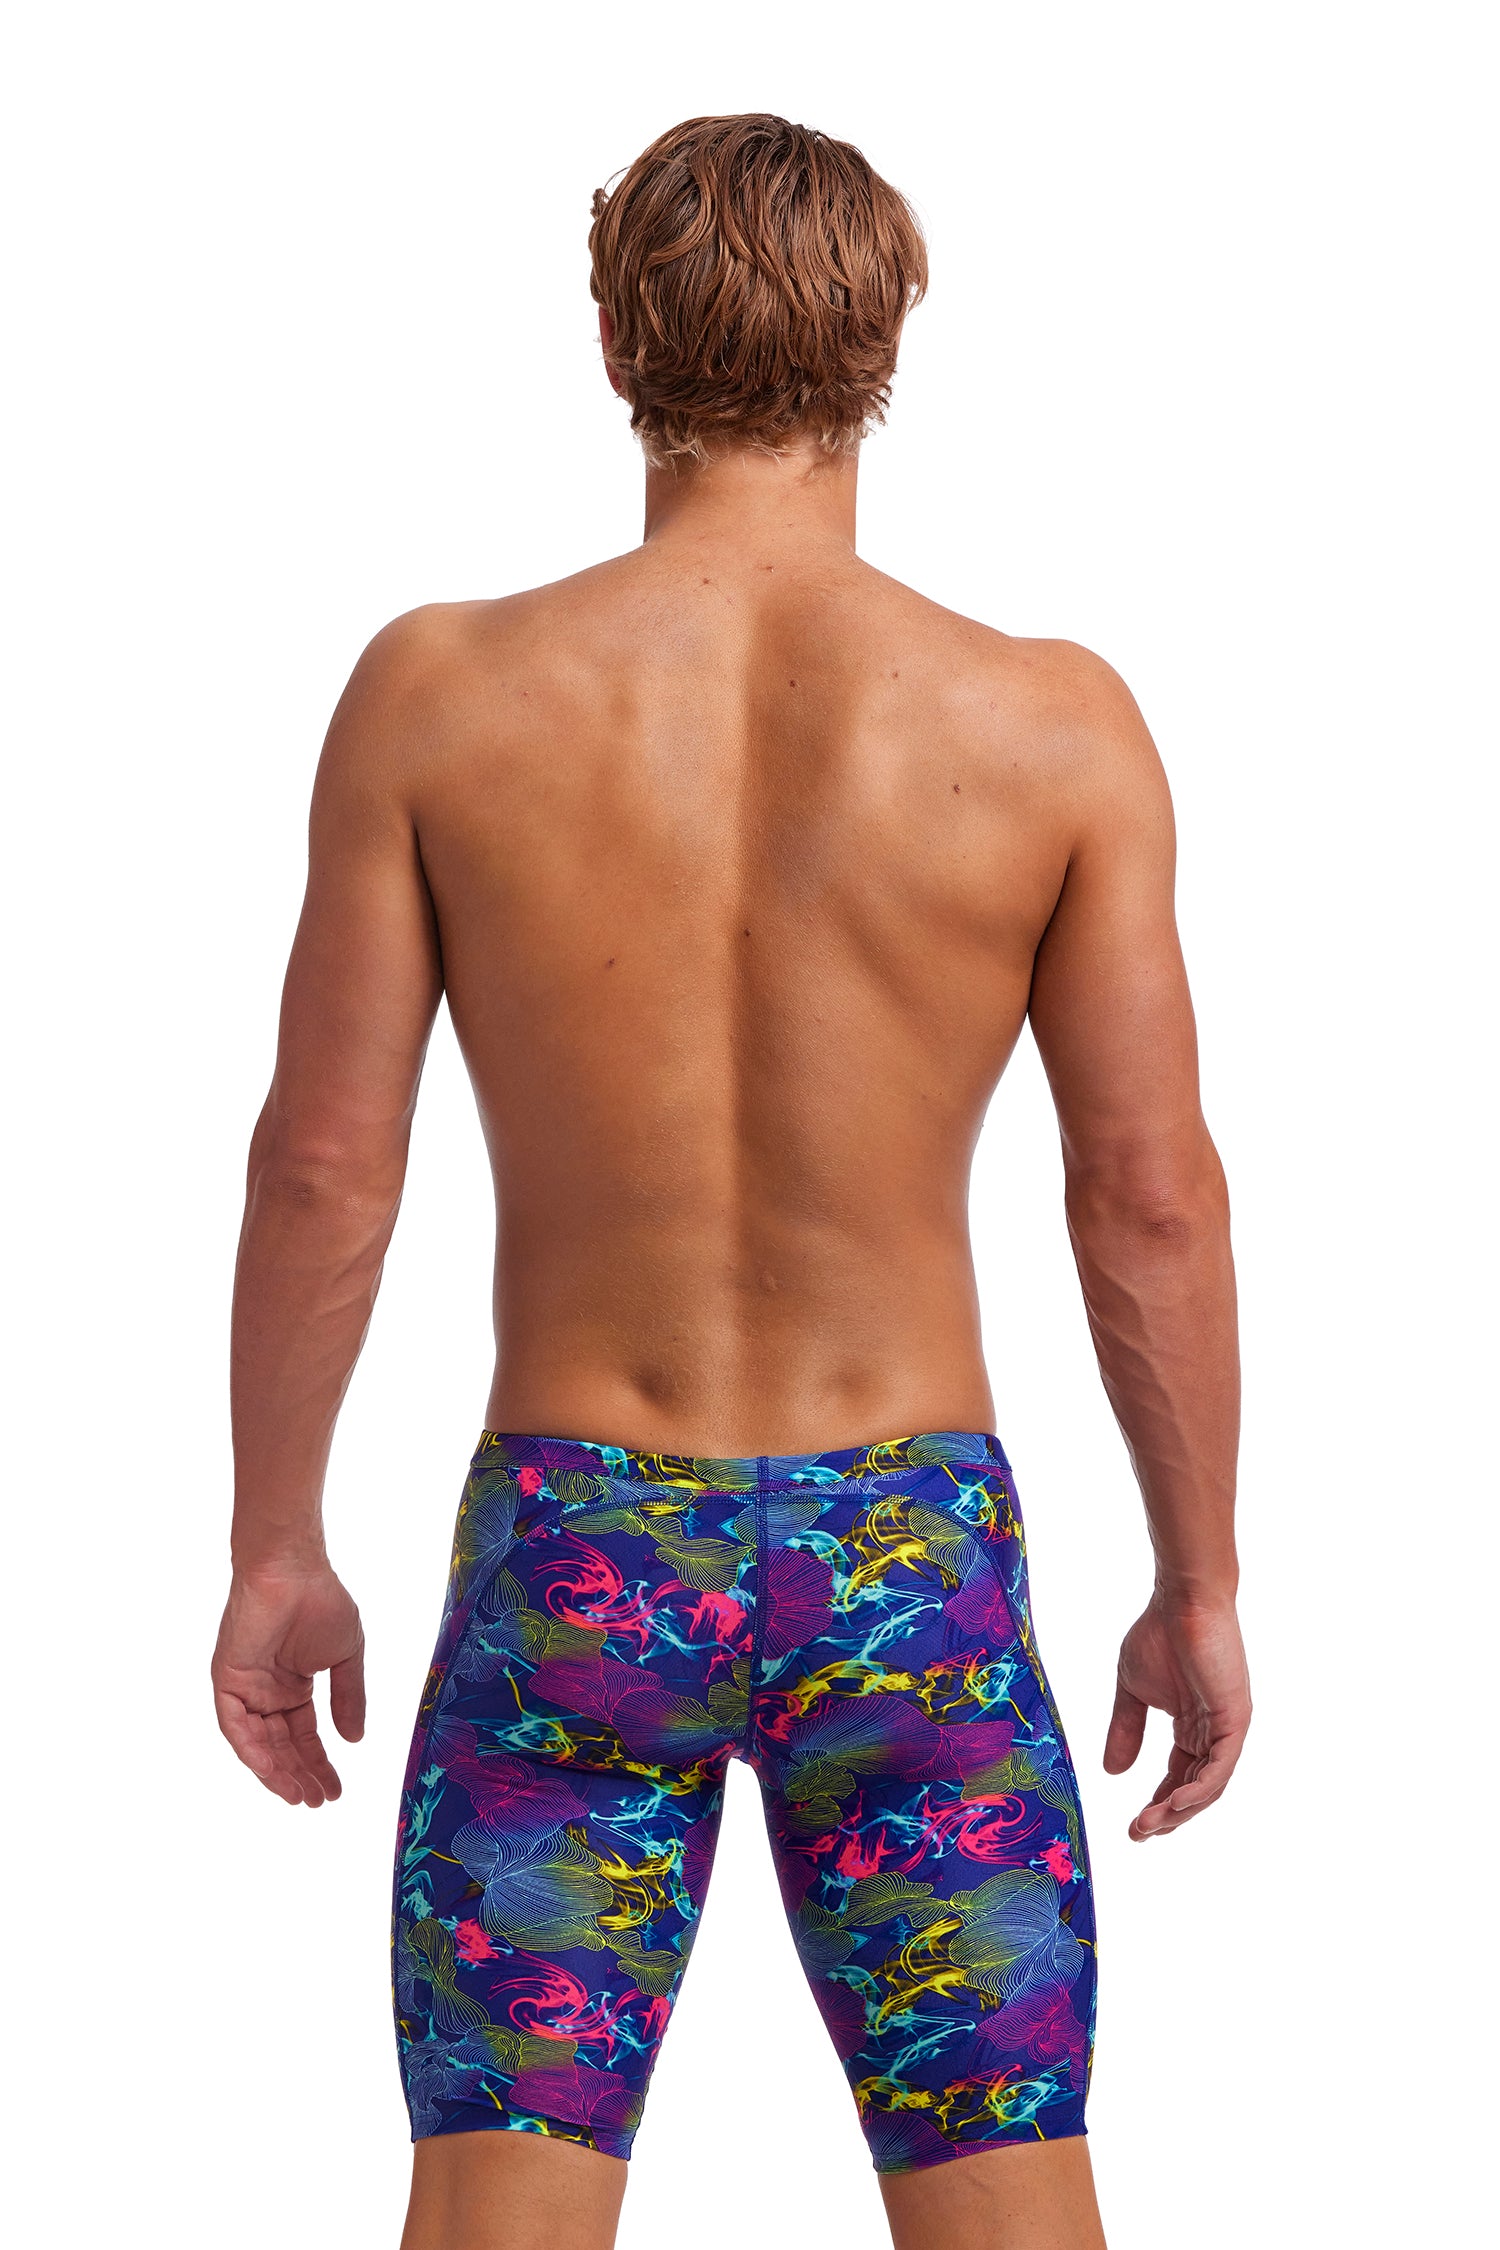 Way Funky Mother Funky Funky Trunks Men's Training Jammers Messed Up Swim Trunks Mens